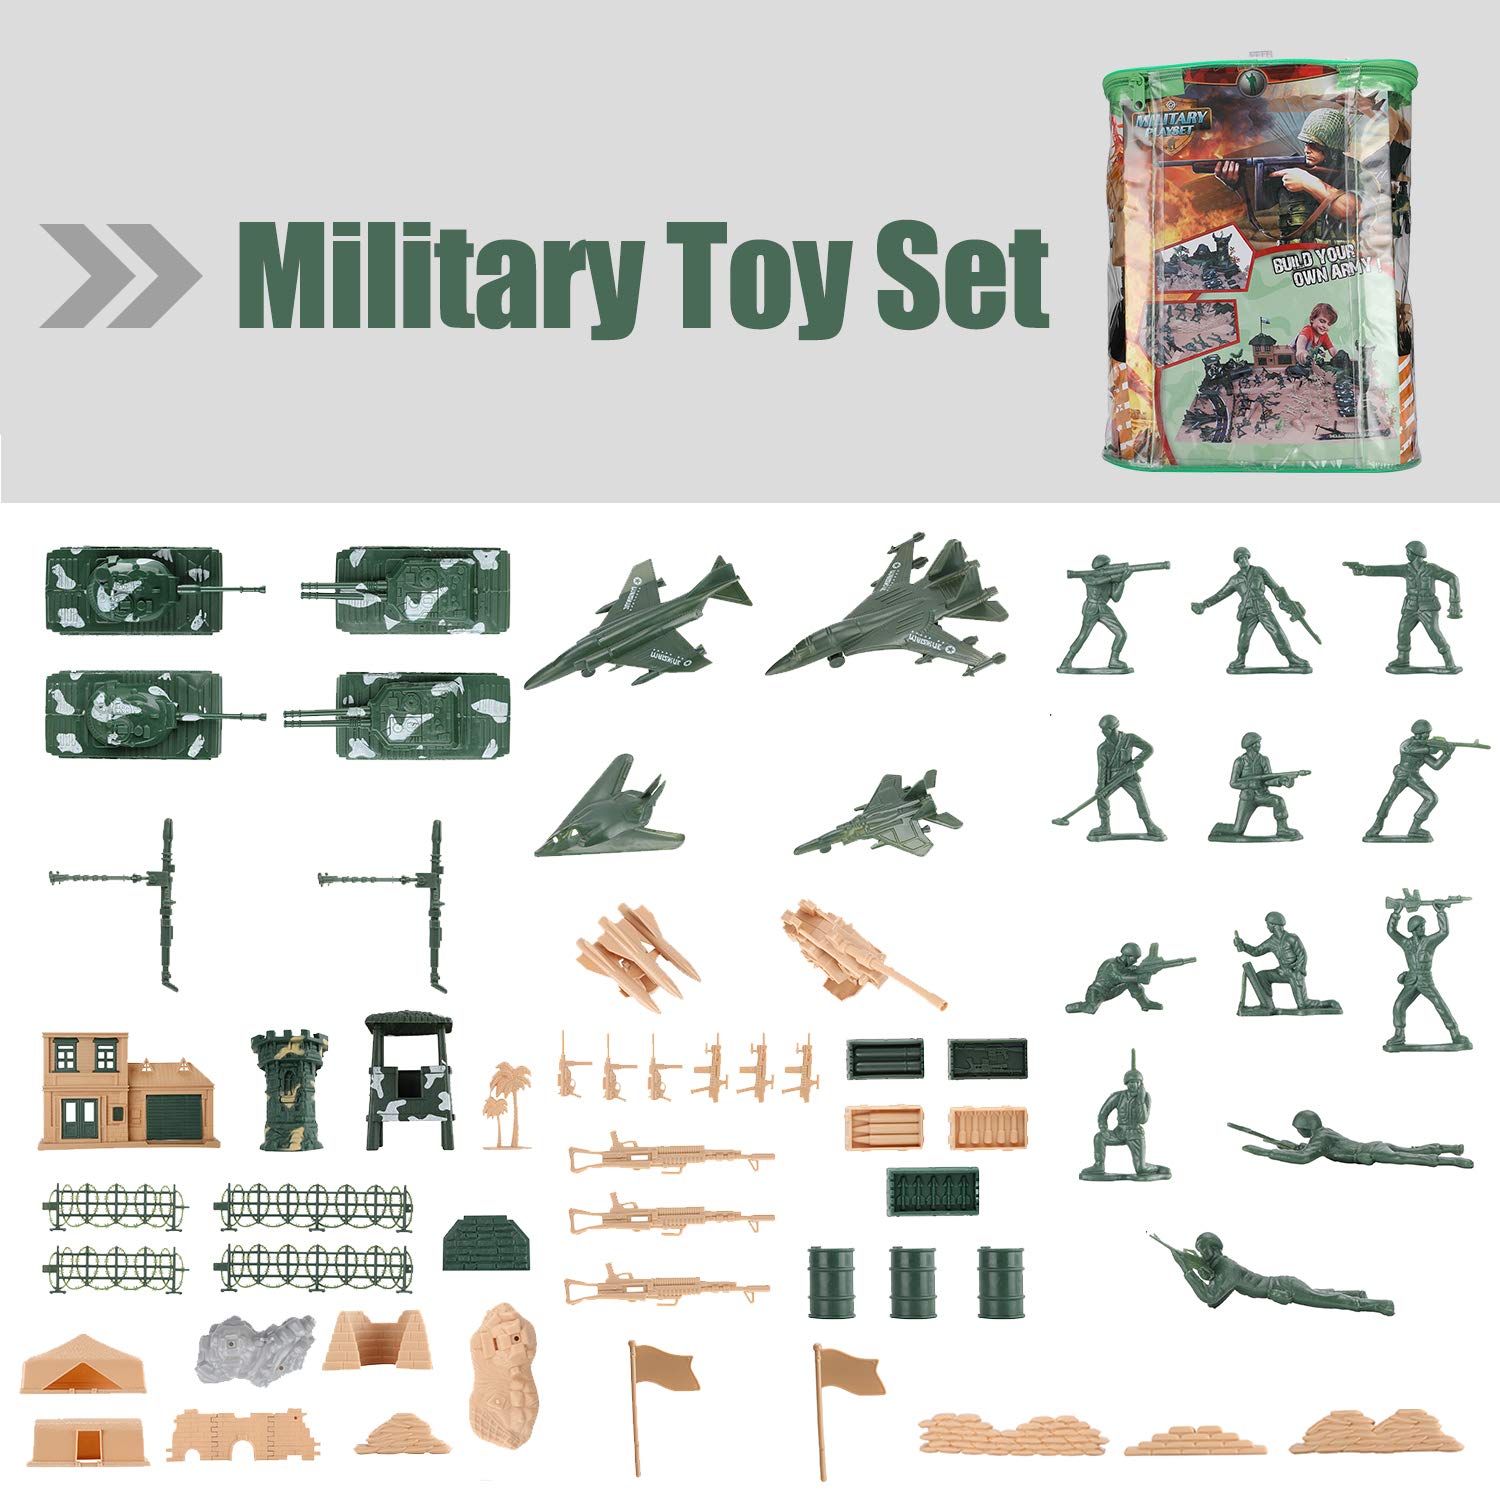 Hautton Toy Army Men Set, 130 PCS Plastic Military Action Figures Combat Battle Playset Bucket with Soldiers, Tank, Plane, Helicopter, Flag, Fence, and Battlefield Gift for Boys Kids Children